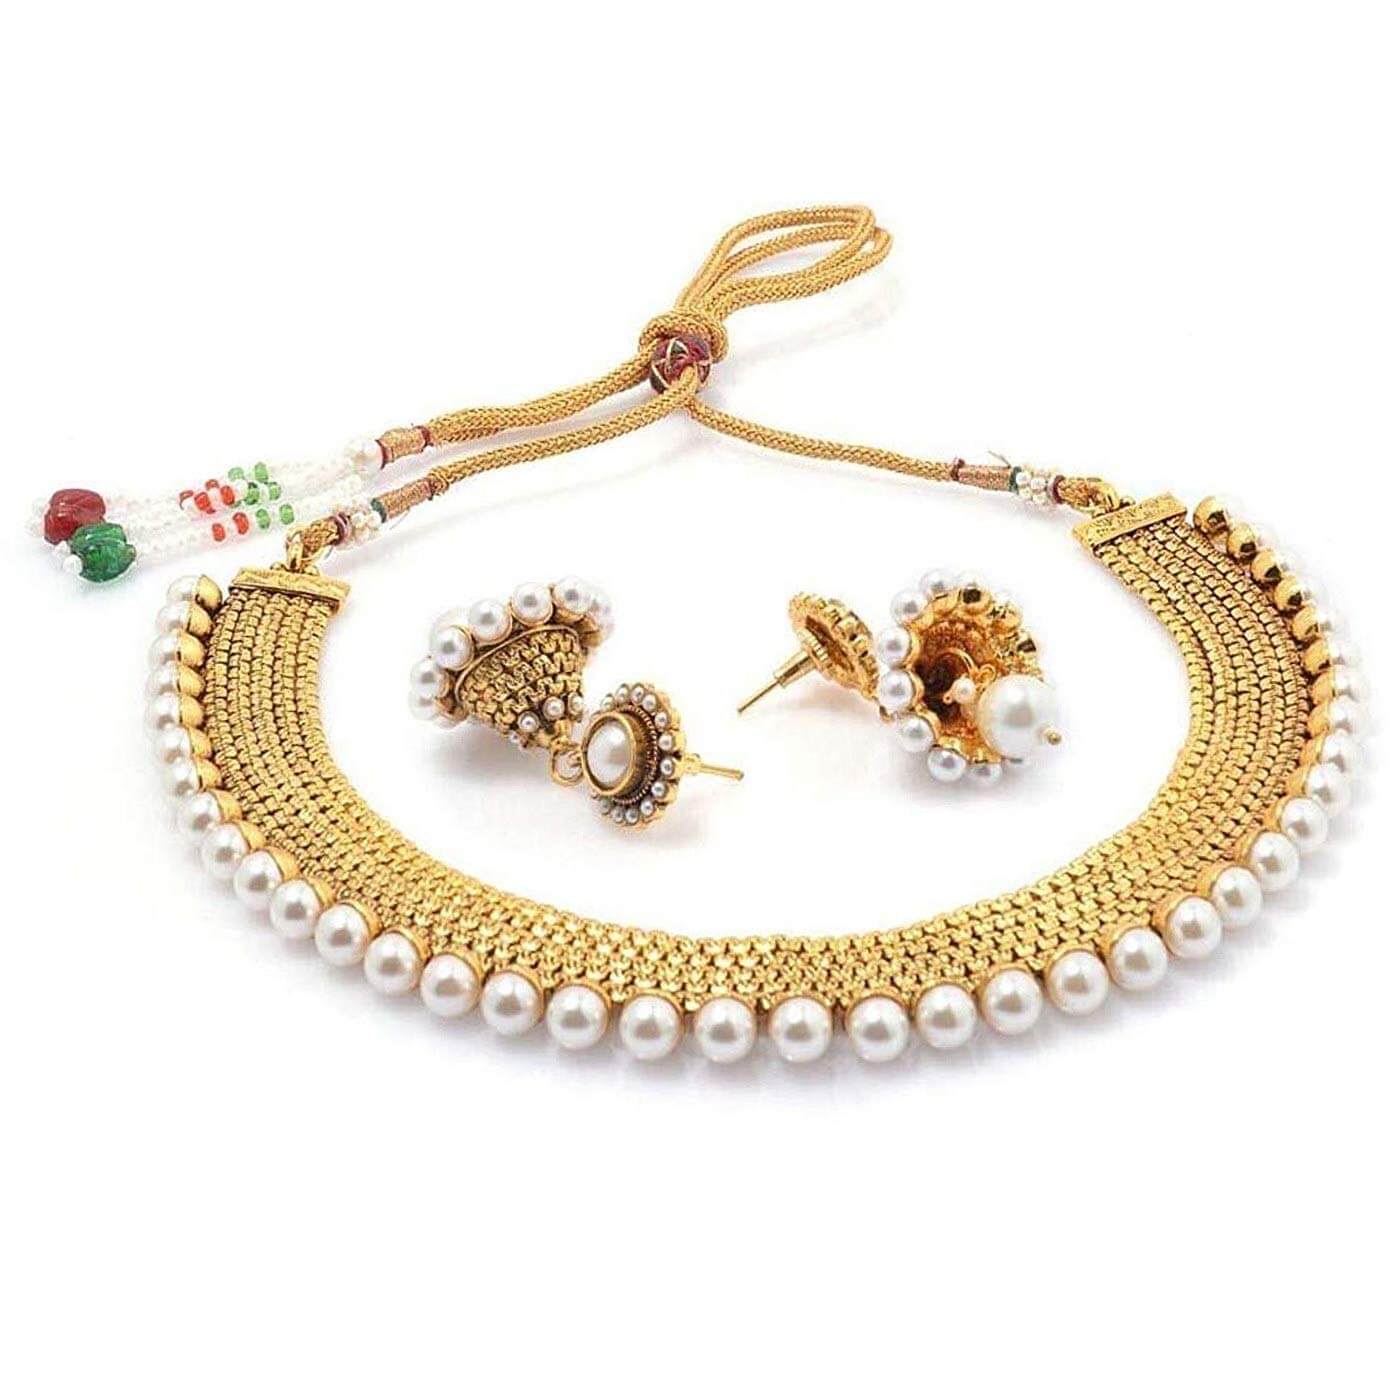 Gold Plated/Pearl Choker Necklace Set/for Women -WEDDING, BIRTHDAY,  PARTIES. | eBay